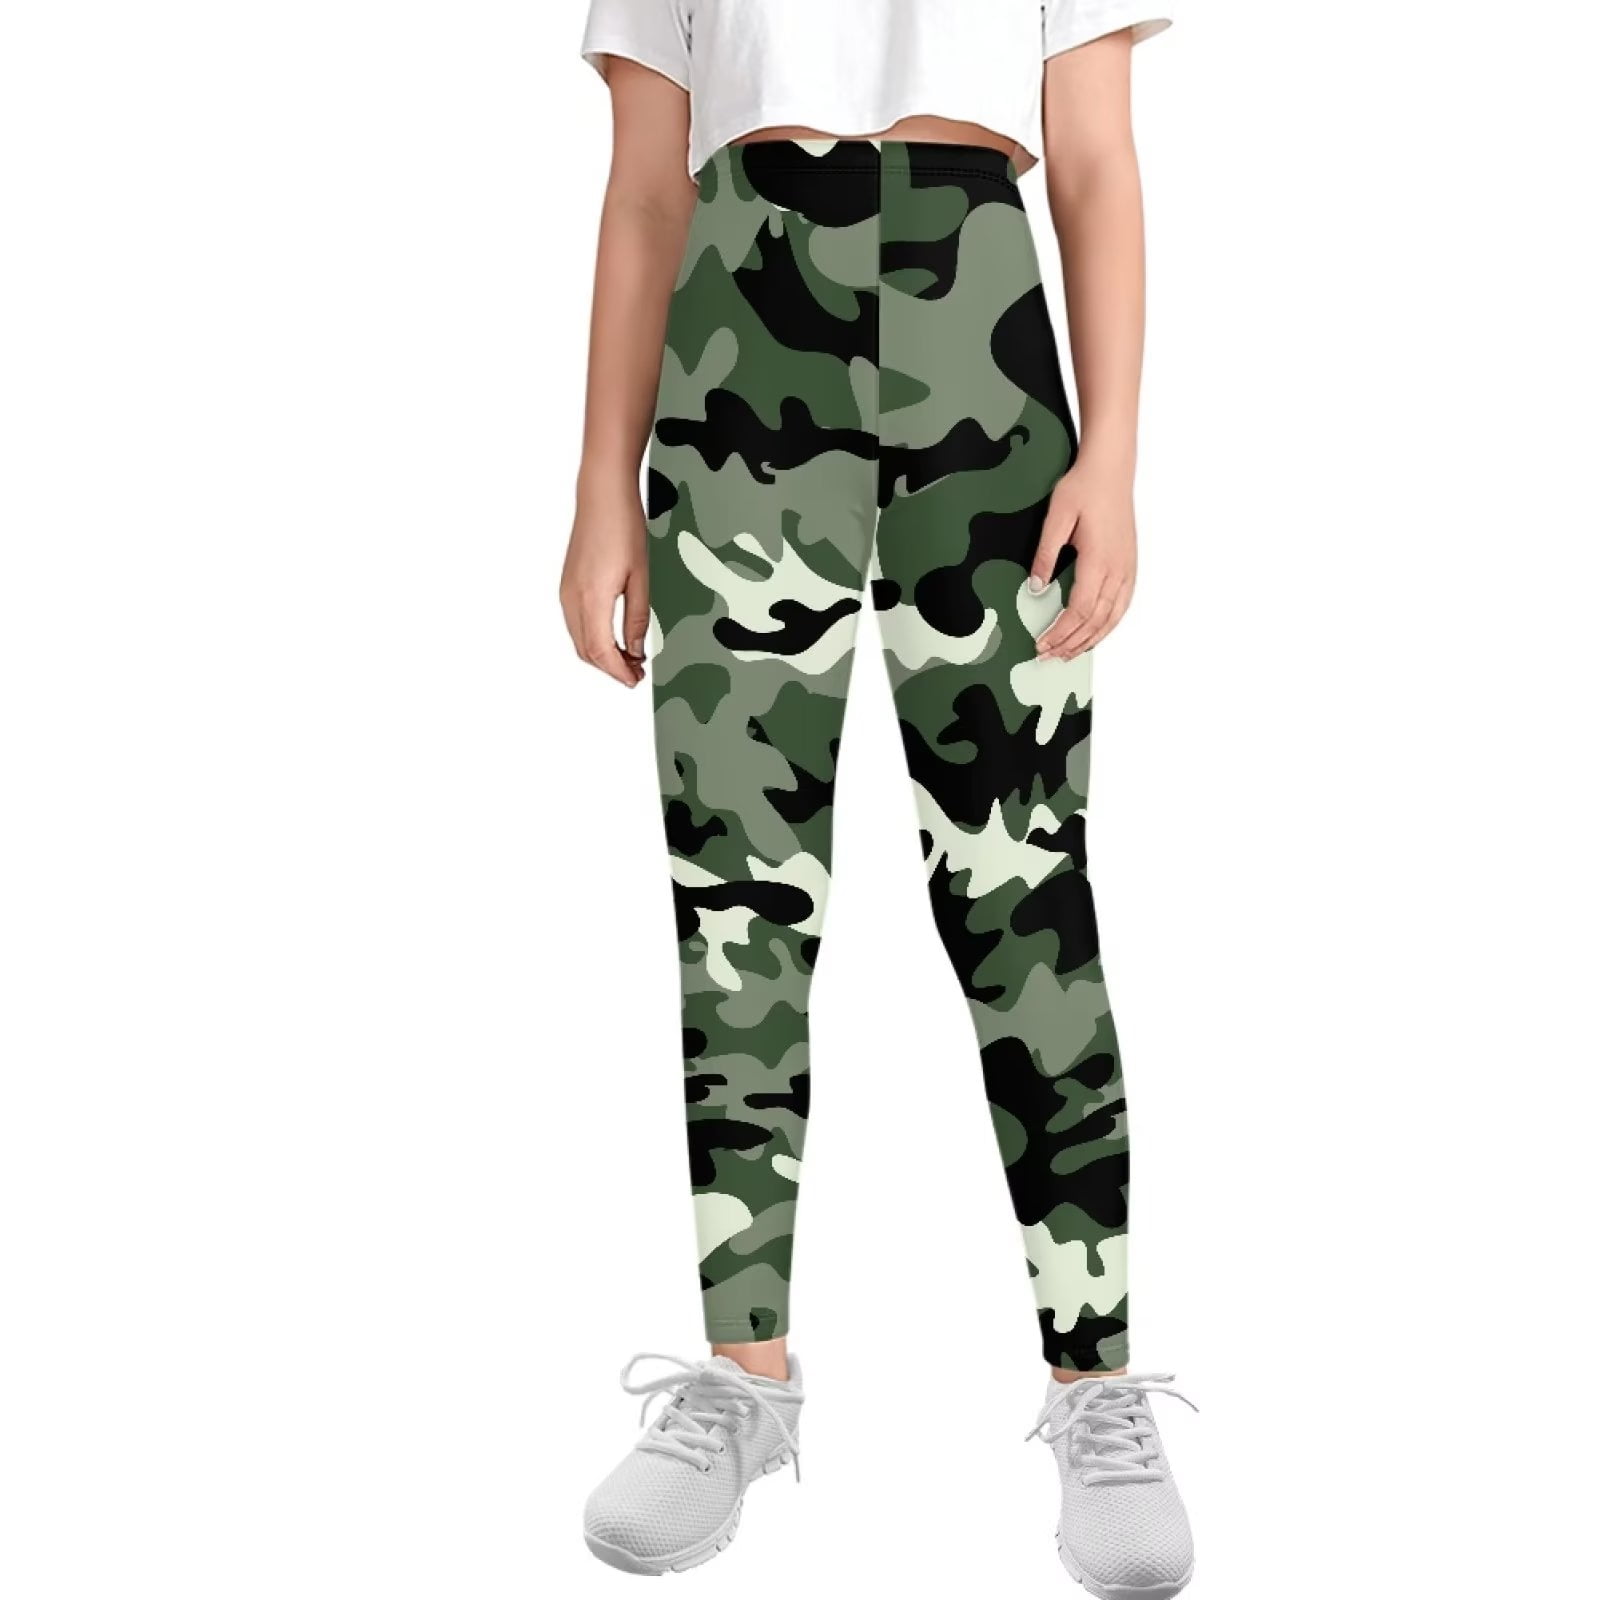 FKELYI Camo Hunting Army Girls Leggings Size 6-7 Years Breathable Hiking  Youth Tights Durable Workout Yoga Pants High Waisted Yummy Control 